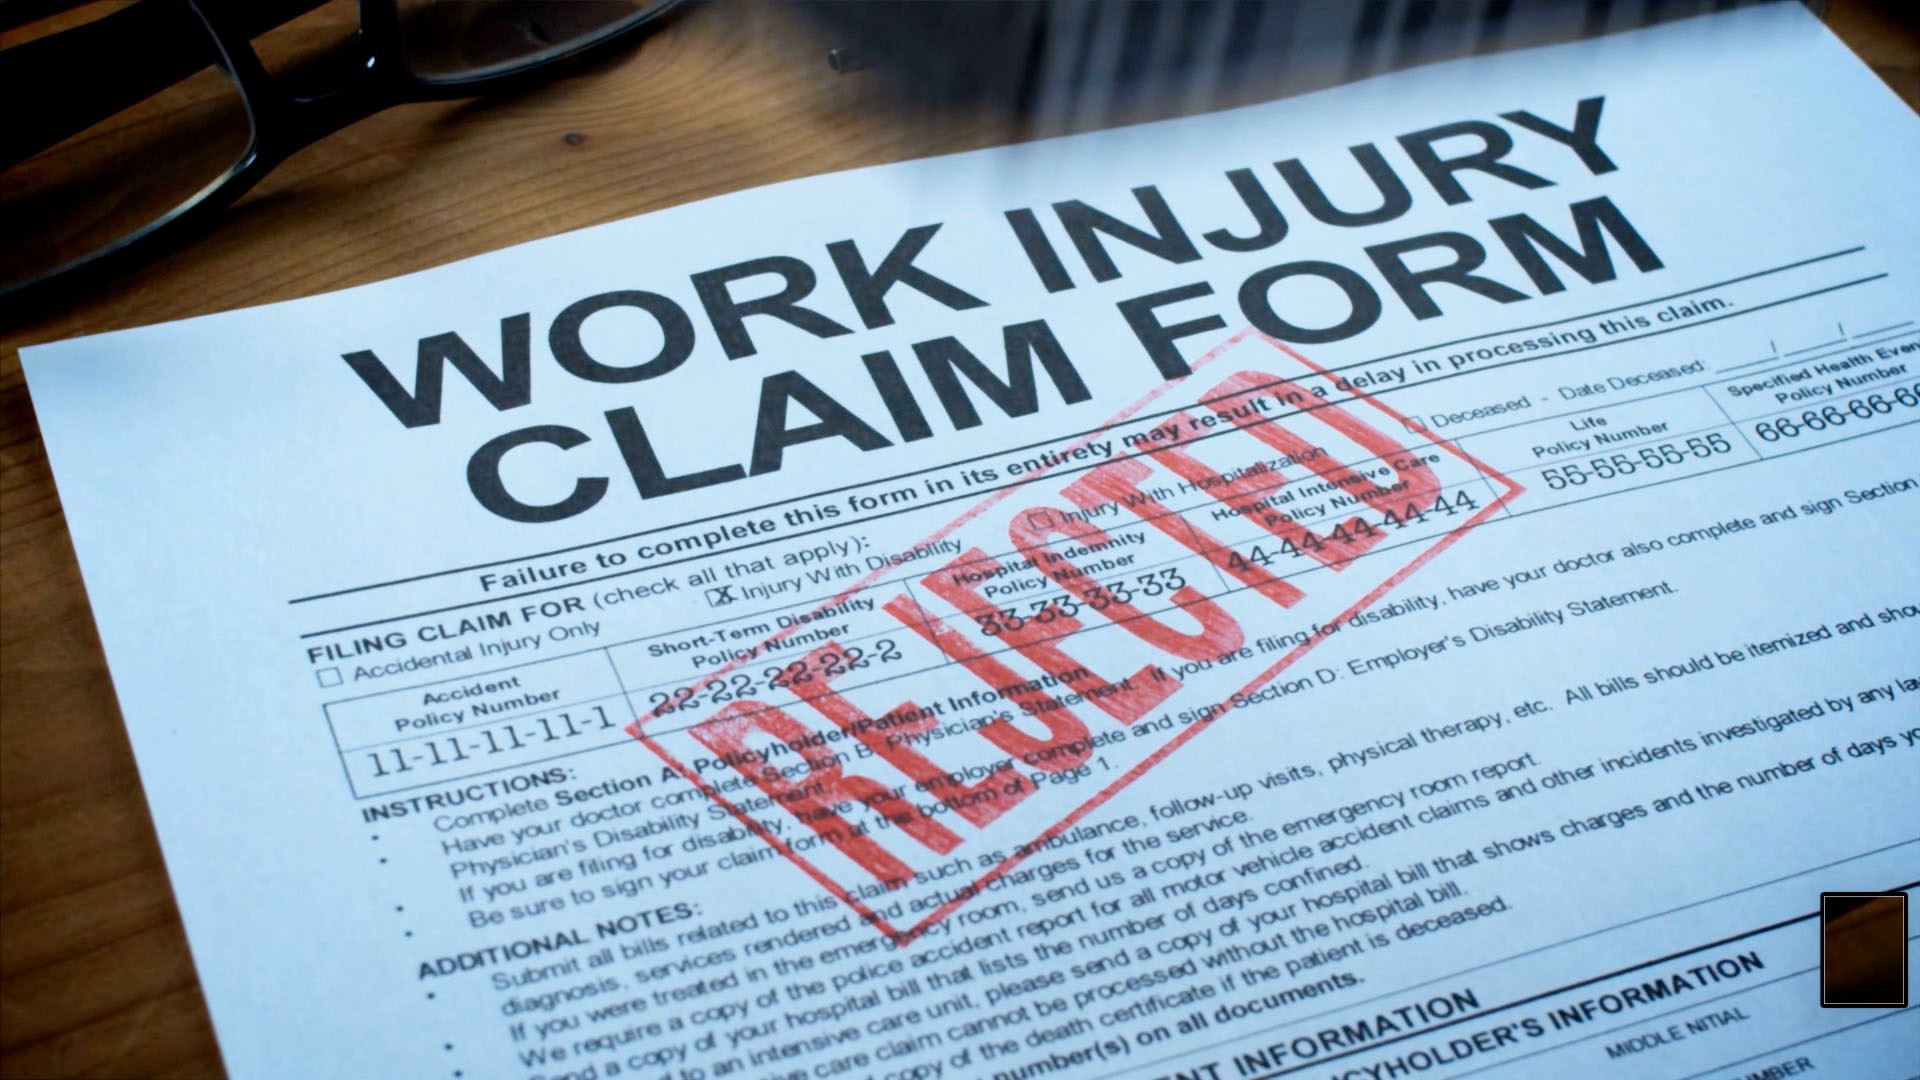 What If Your Pre-existing Condition Has Been Aggravated By Your Job? -  ALl Injuries Law Firm SW Florida